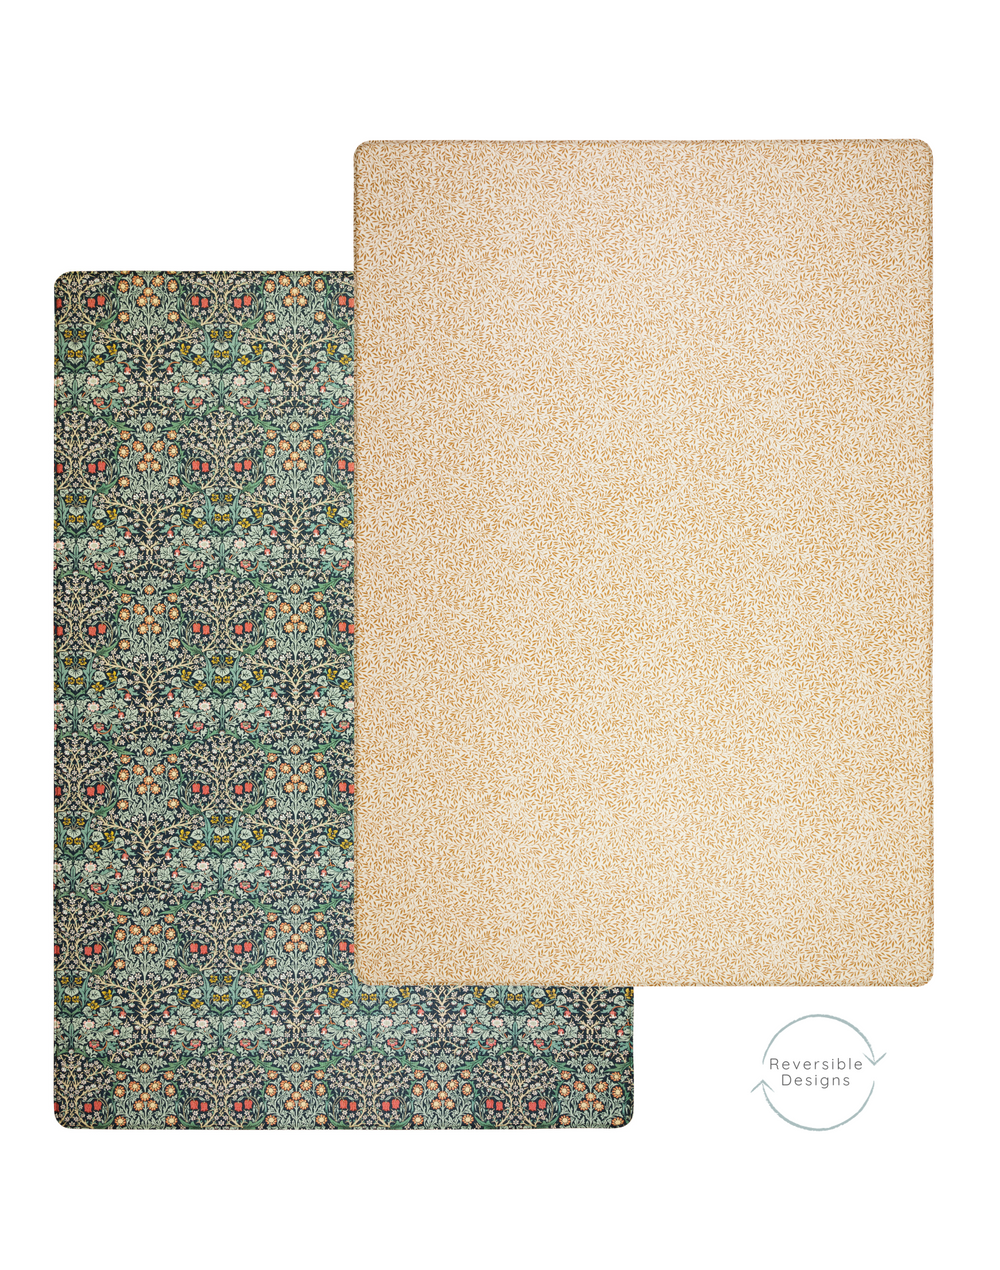 An elegant double-sided play mat with heritage double sided designs from morris & co and totter and tumble collaboration